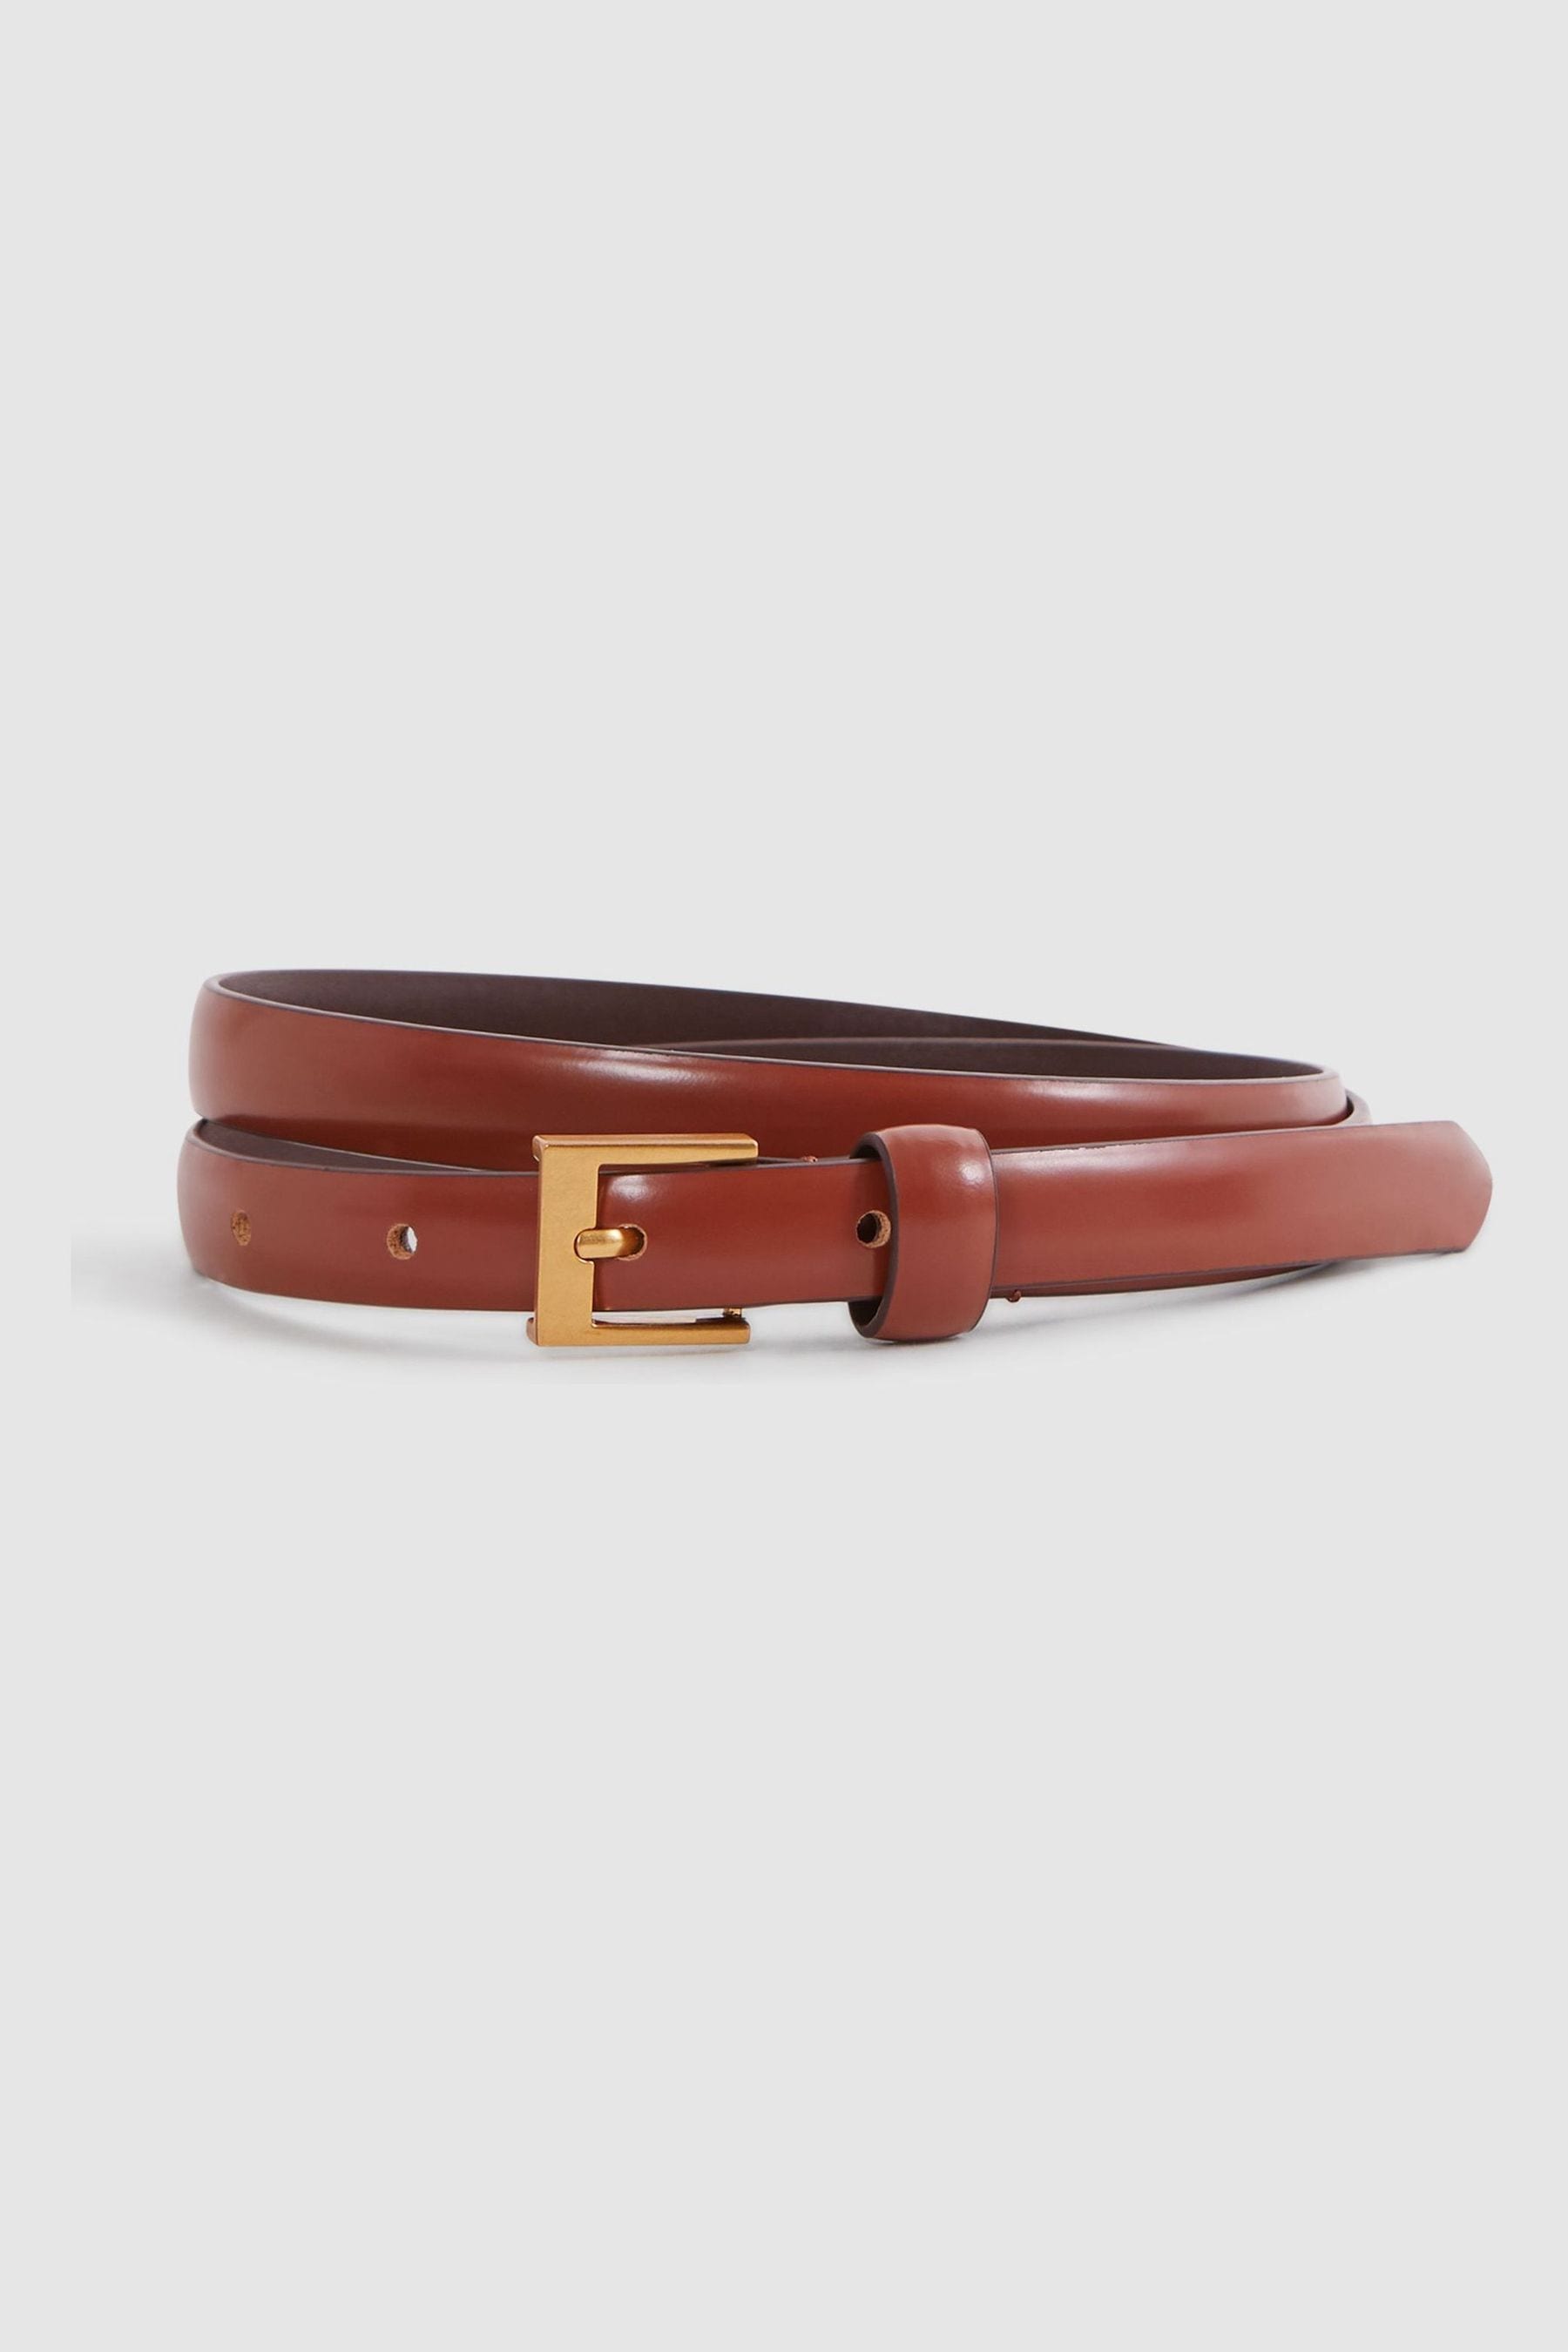 Shop Reiss Holly - Tan Thin Leather Belt, S